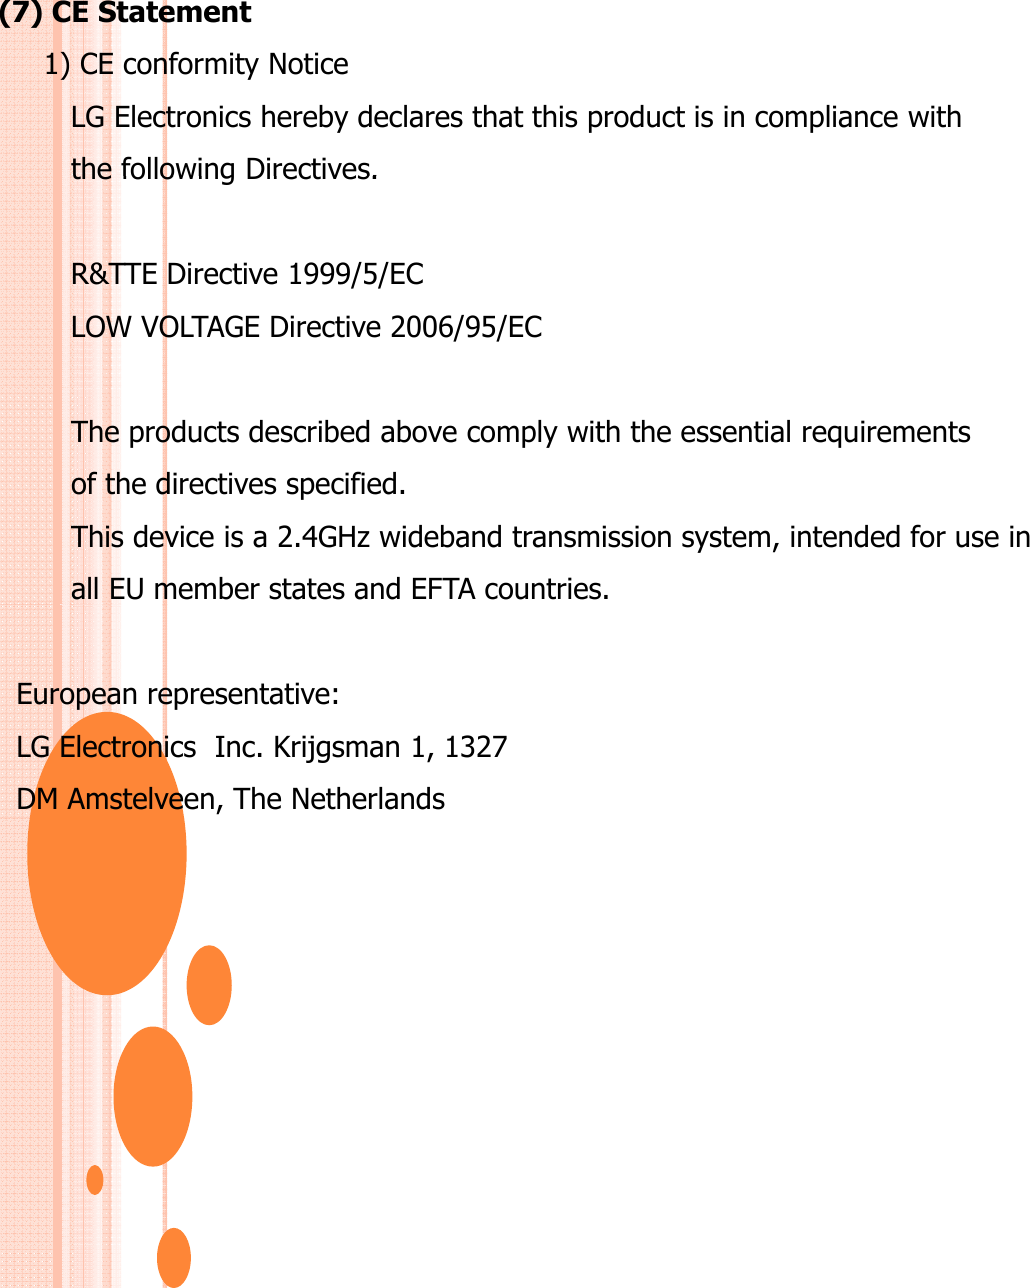 (7) CE Statement1) CE conformity NoticeLG Electronics hereby declares that this product is in compliance with the following Directives.the following Directives. R&amp;TTE Directive 1999/5/EC LOW VOLTAGE Directive 2006/95/EC The products described above comply with the essential requirements of the directives specified. This device is a 2.4GHz wideband transmission system, intended for use inall EU member states and EFTA countries.European representative: LG Electronics  Inc. Krijgsman 1, 1327 DM Amstelveen, The Netherlands